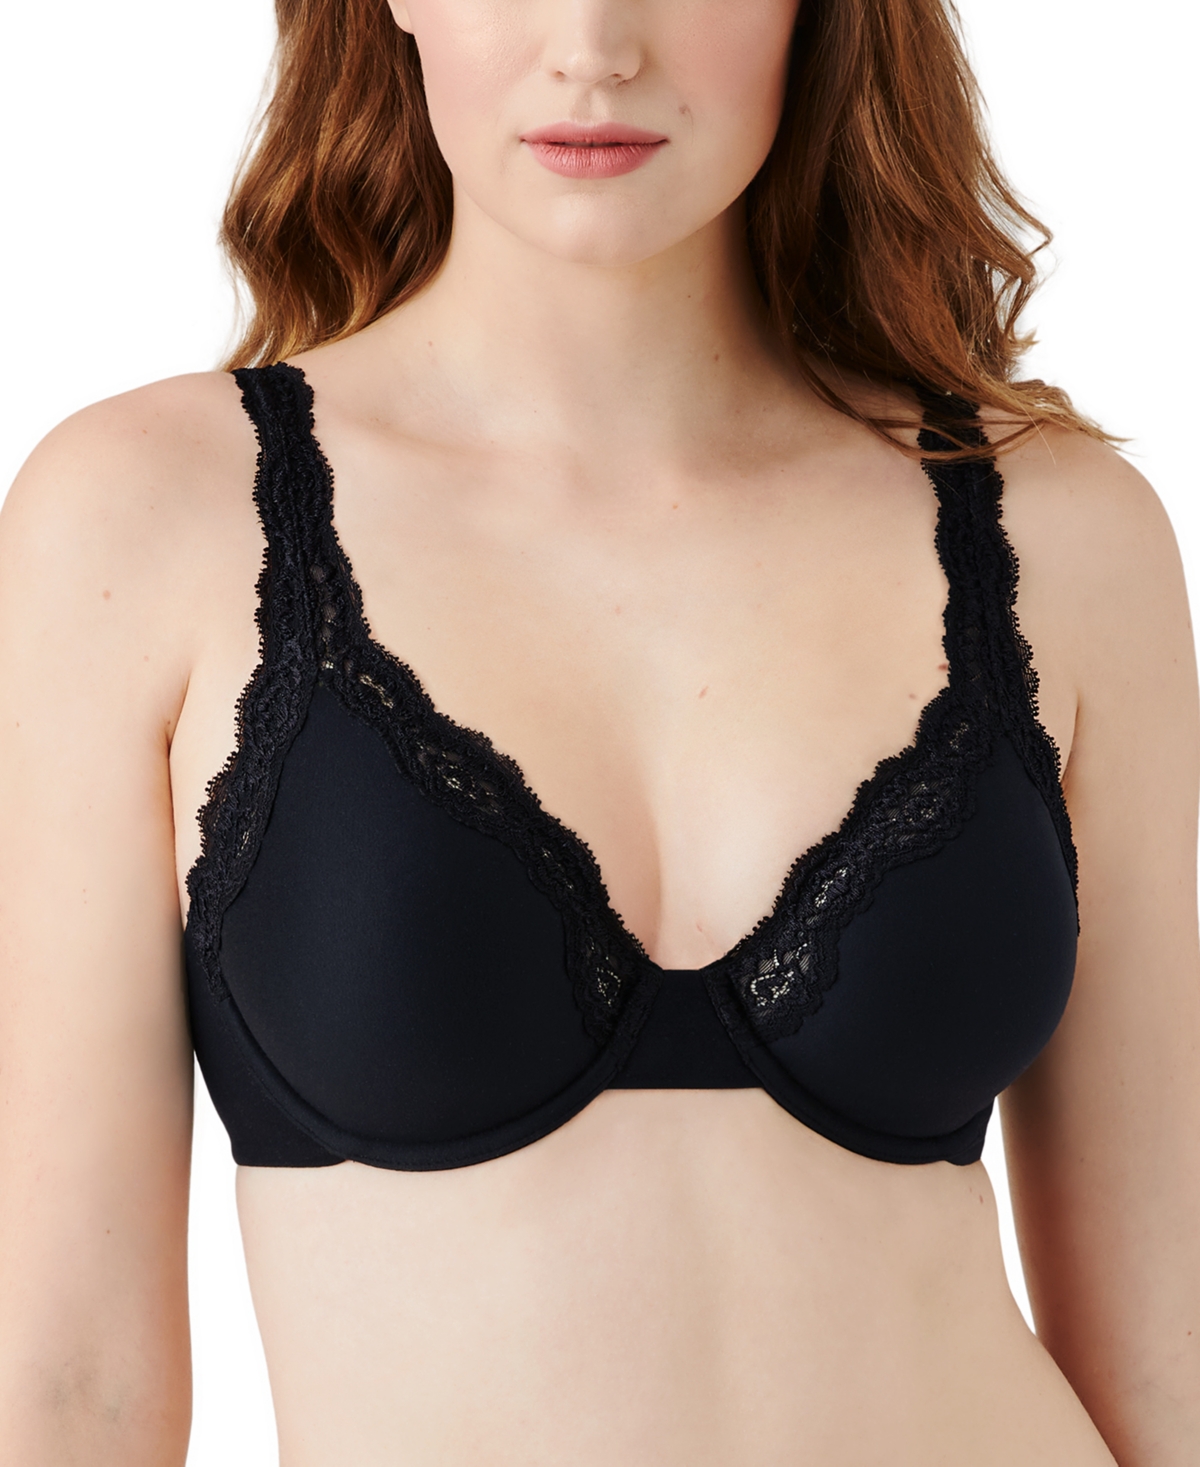 Women's Superbly Smooth Underwire Bra 855342, Up to H Cup